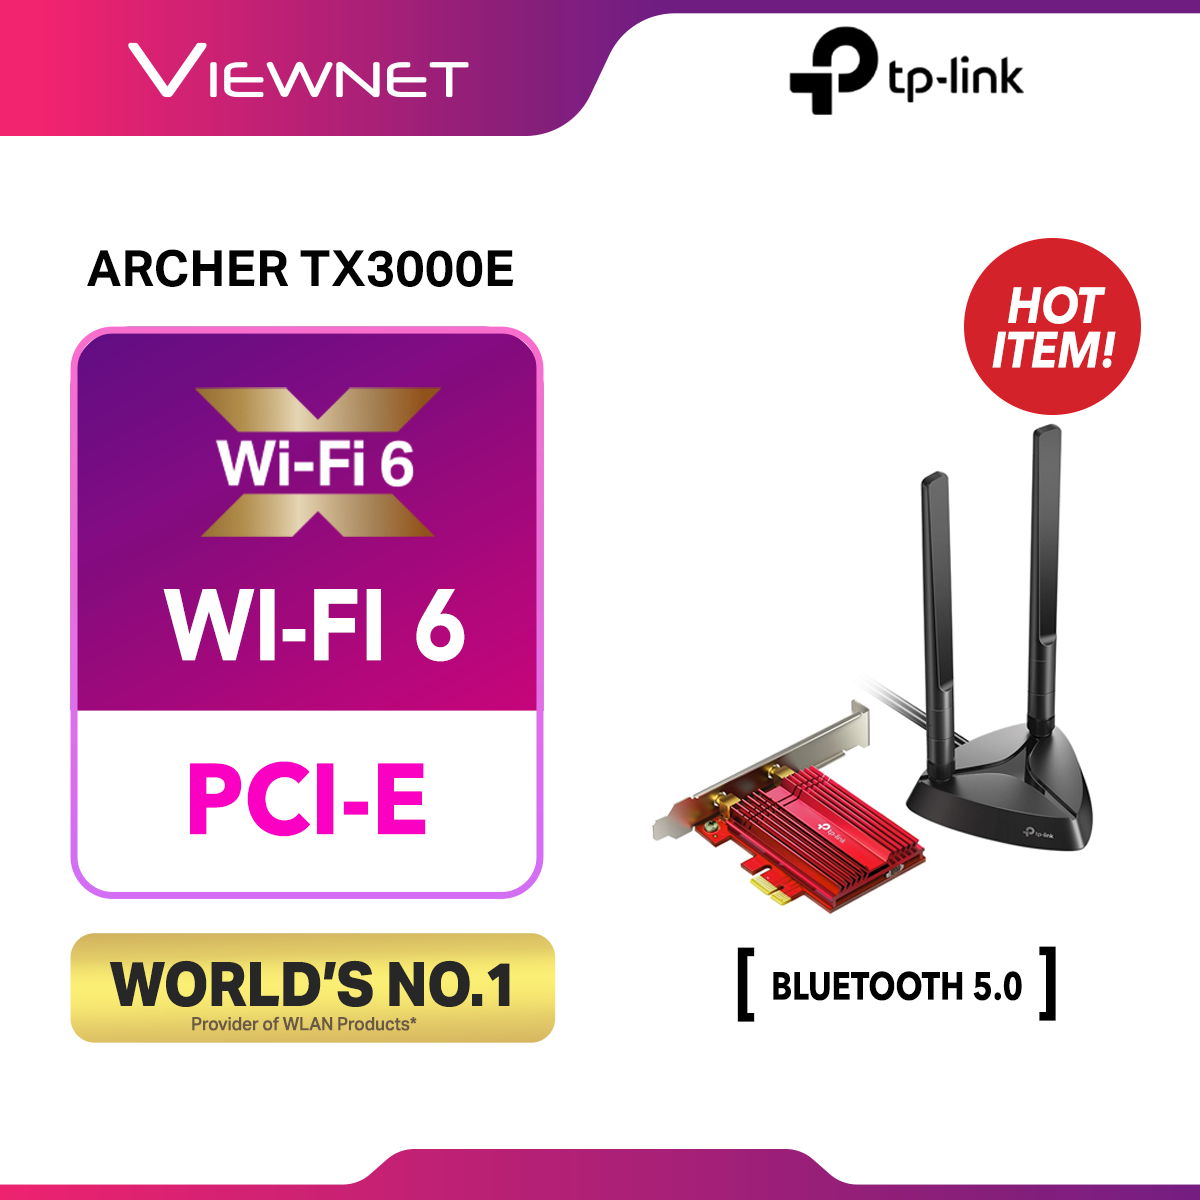 TP-Link ARCHER TX3000E - AX3000 Wi-Fi 6 Bluetooth 5.0 PCle Adapter, 5.0 Bluetooth, Intel Wifi 6 Chipset, Ultra-Low Latency